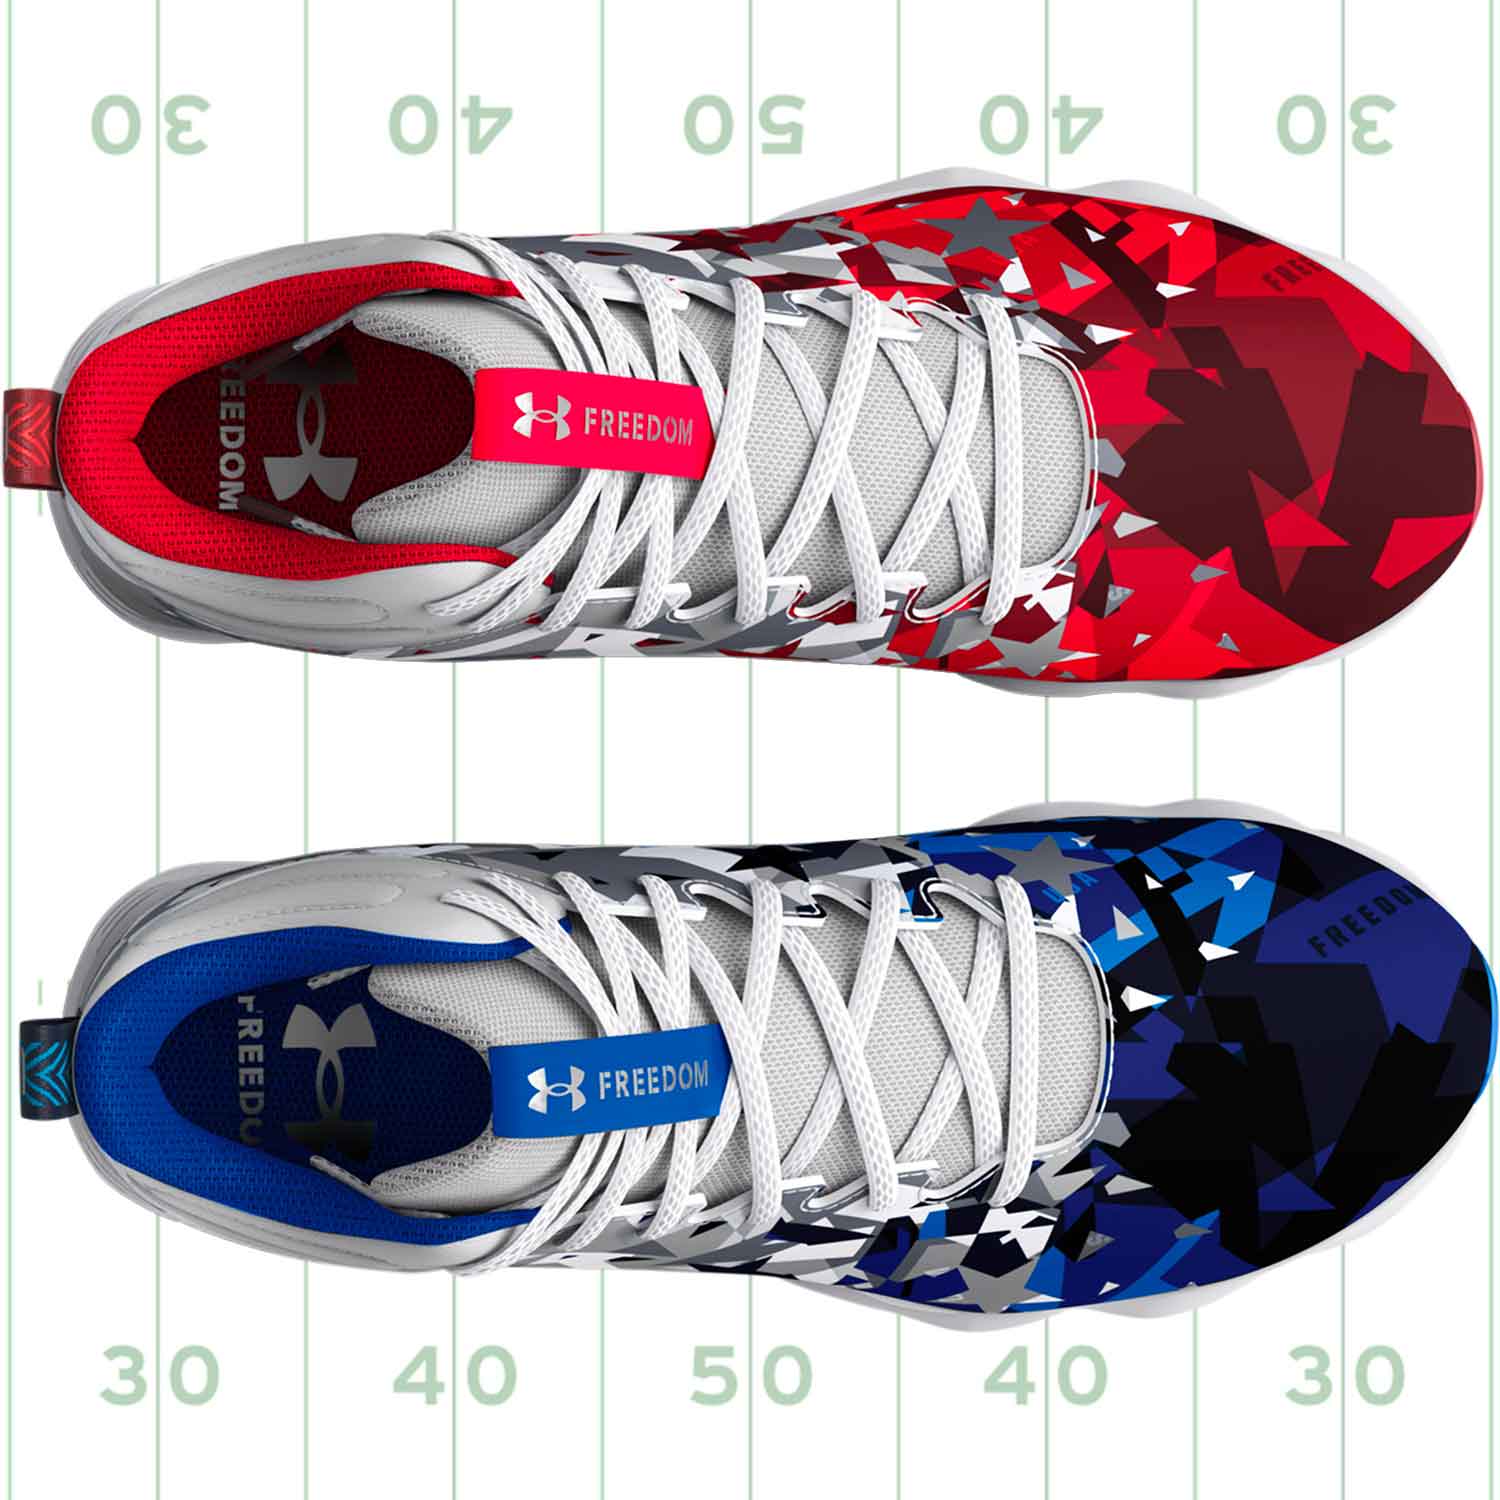 Under Armour Spotlight Franchise 3 RM USA Jr. Youth Football Shoes